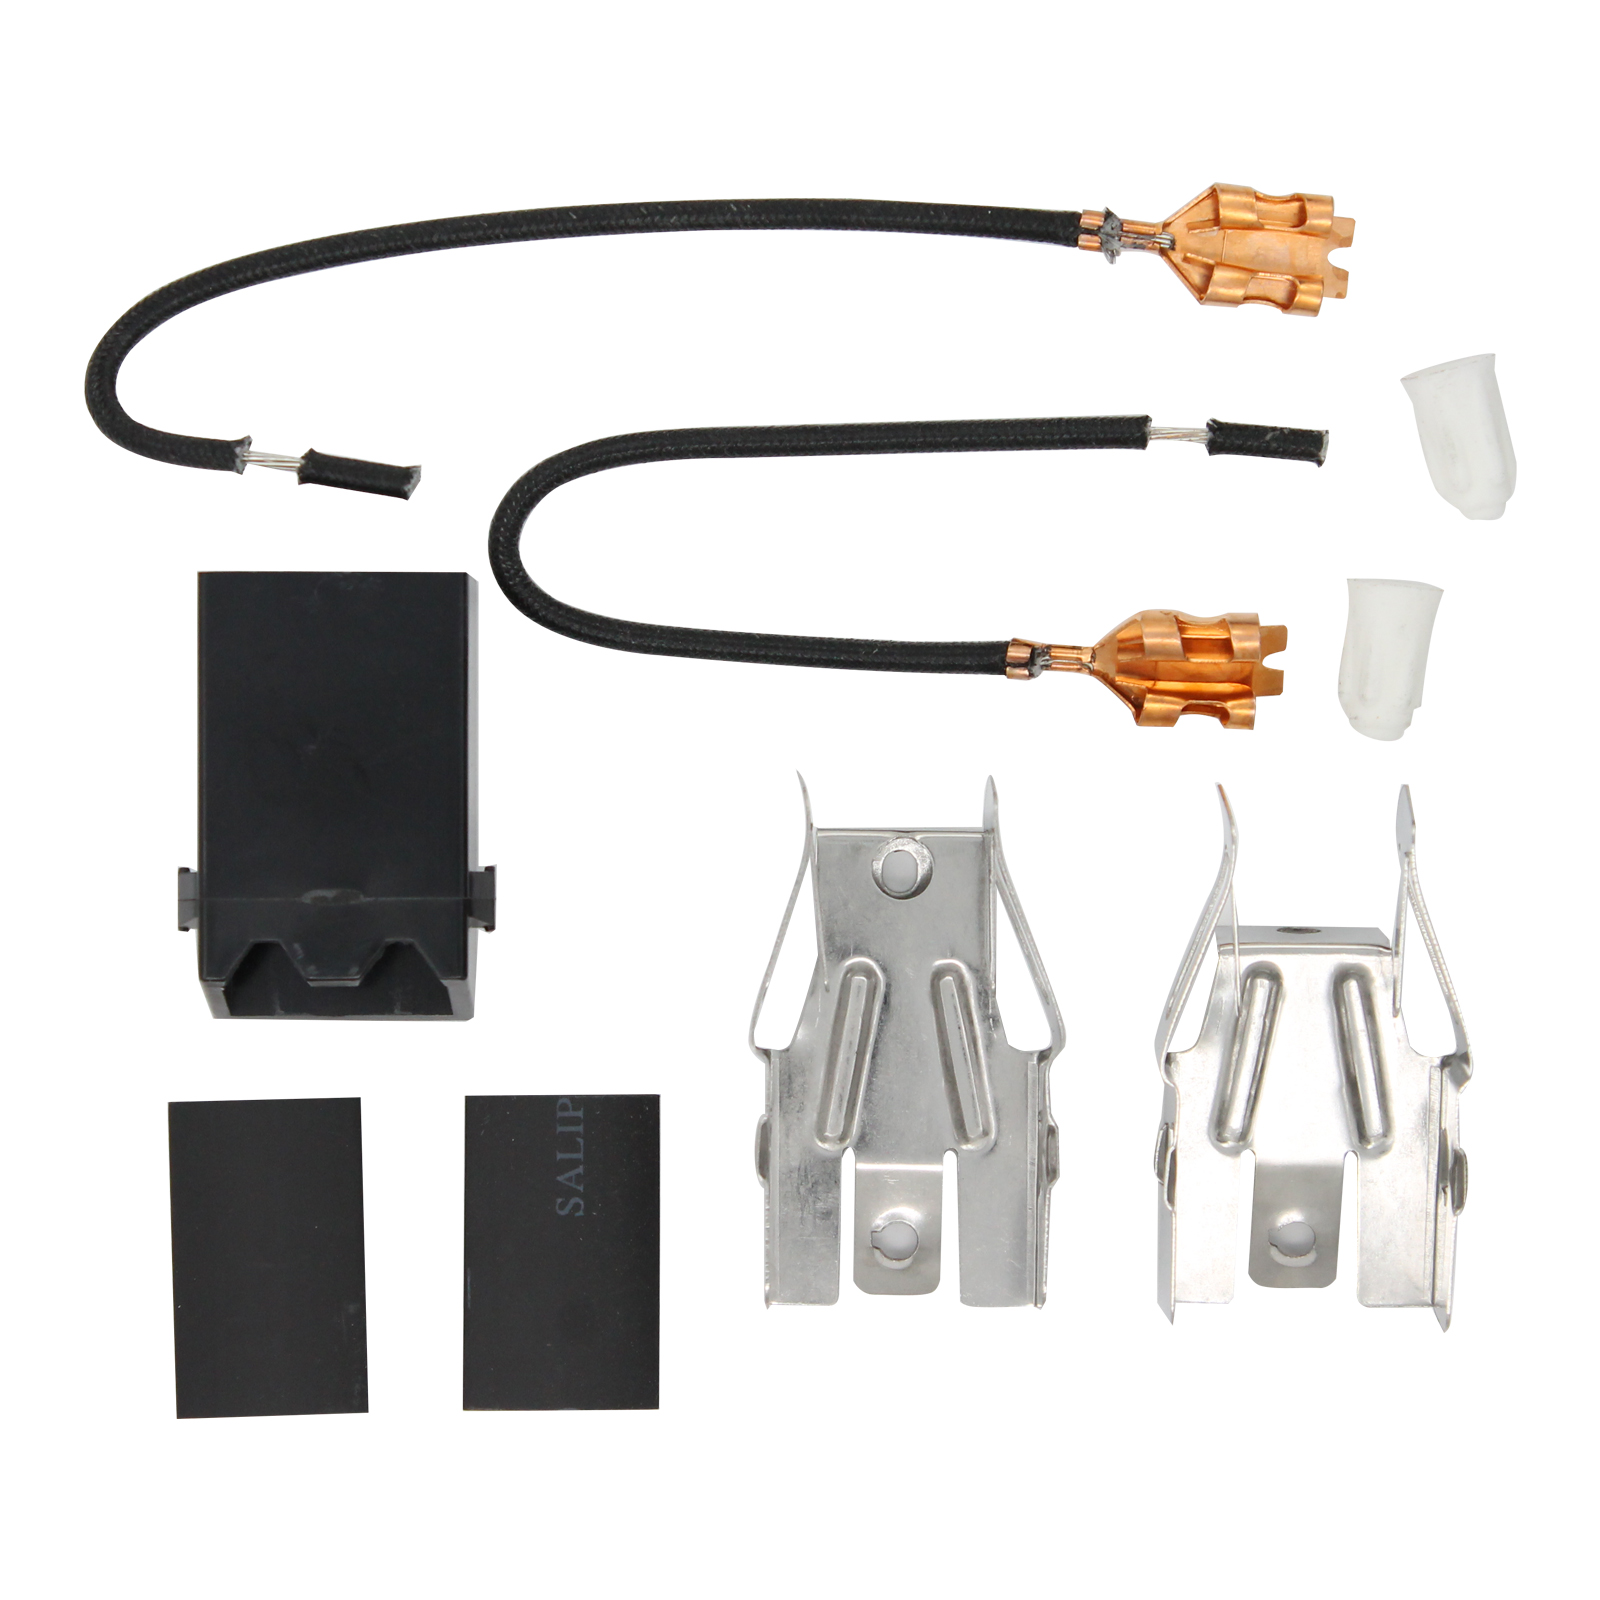 330031 Top Burner Receptacle Kit Replacement for Roper FES310YW1 Range/Cooktop/Oven - Compatible with 330031 Range Burner Receptacle Kit - UpStart Components Brand - image 4 of 4